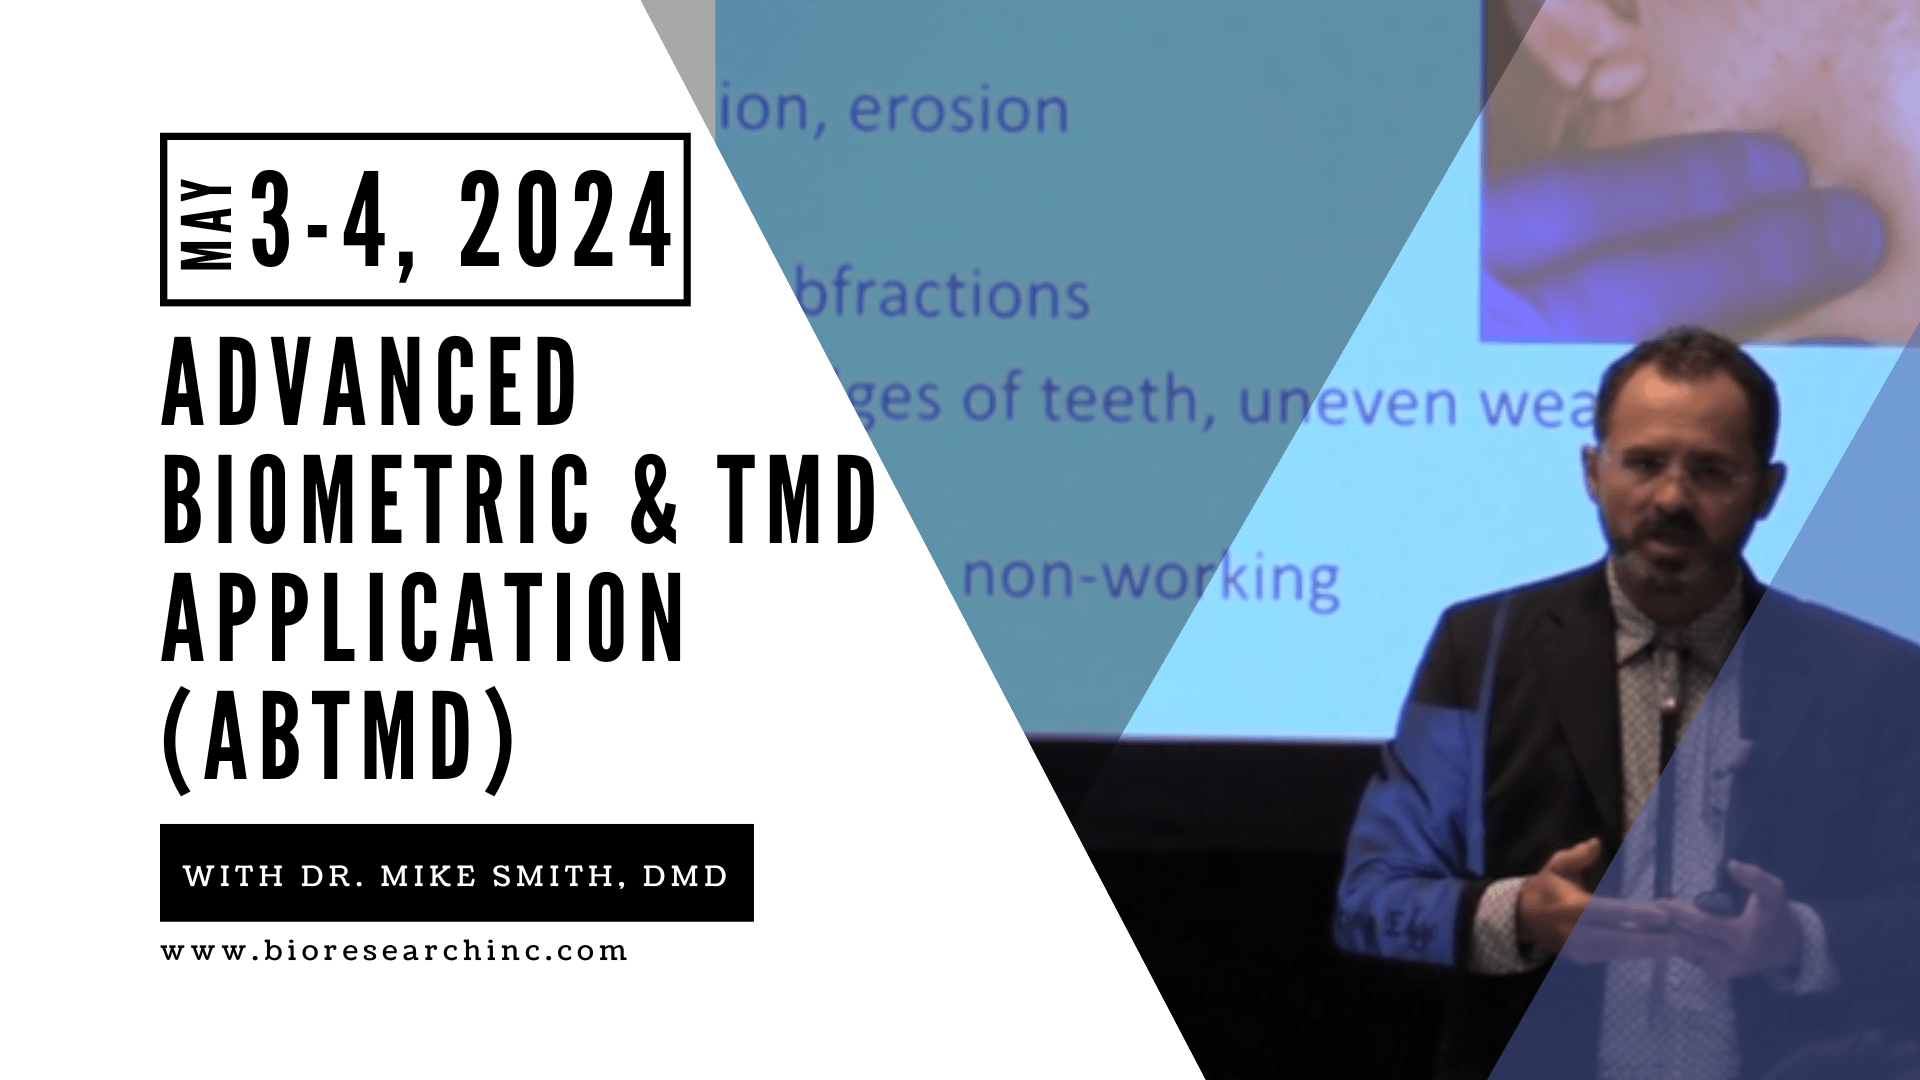 Advanced biometric and TMD application dental course May 2023